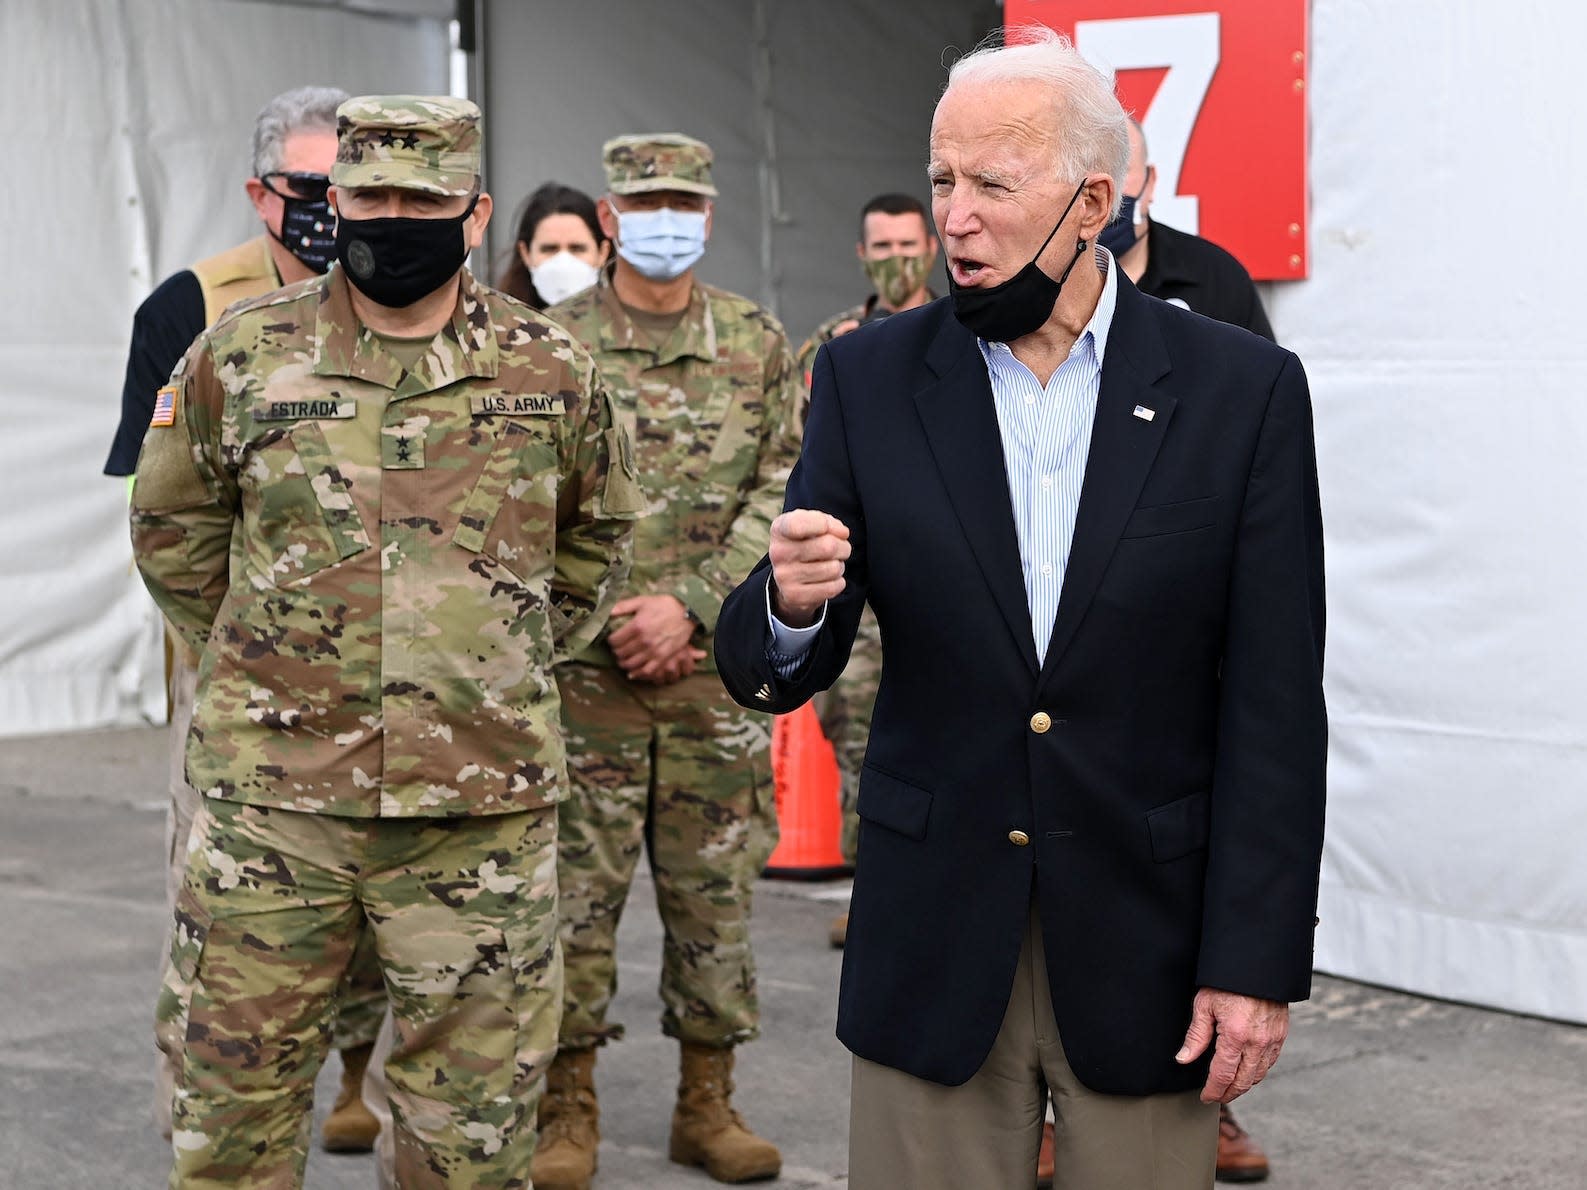 Despite what the CDC says, domestic travel is safe for people who are fully vaccinated, even Biden is doing it